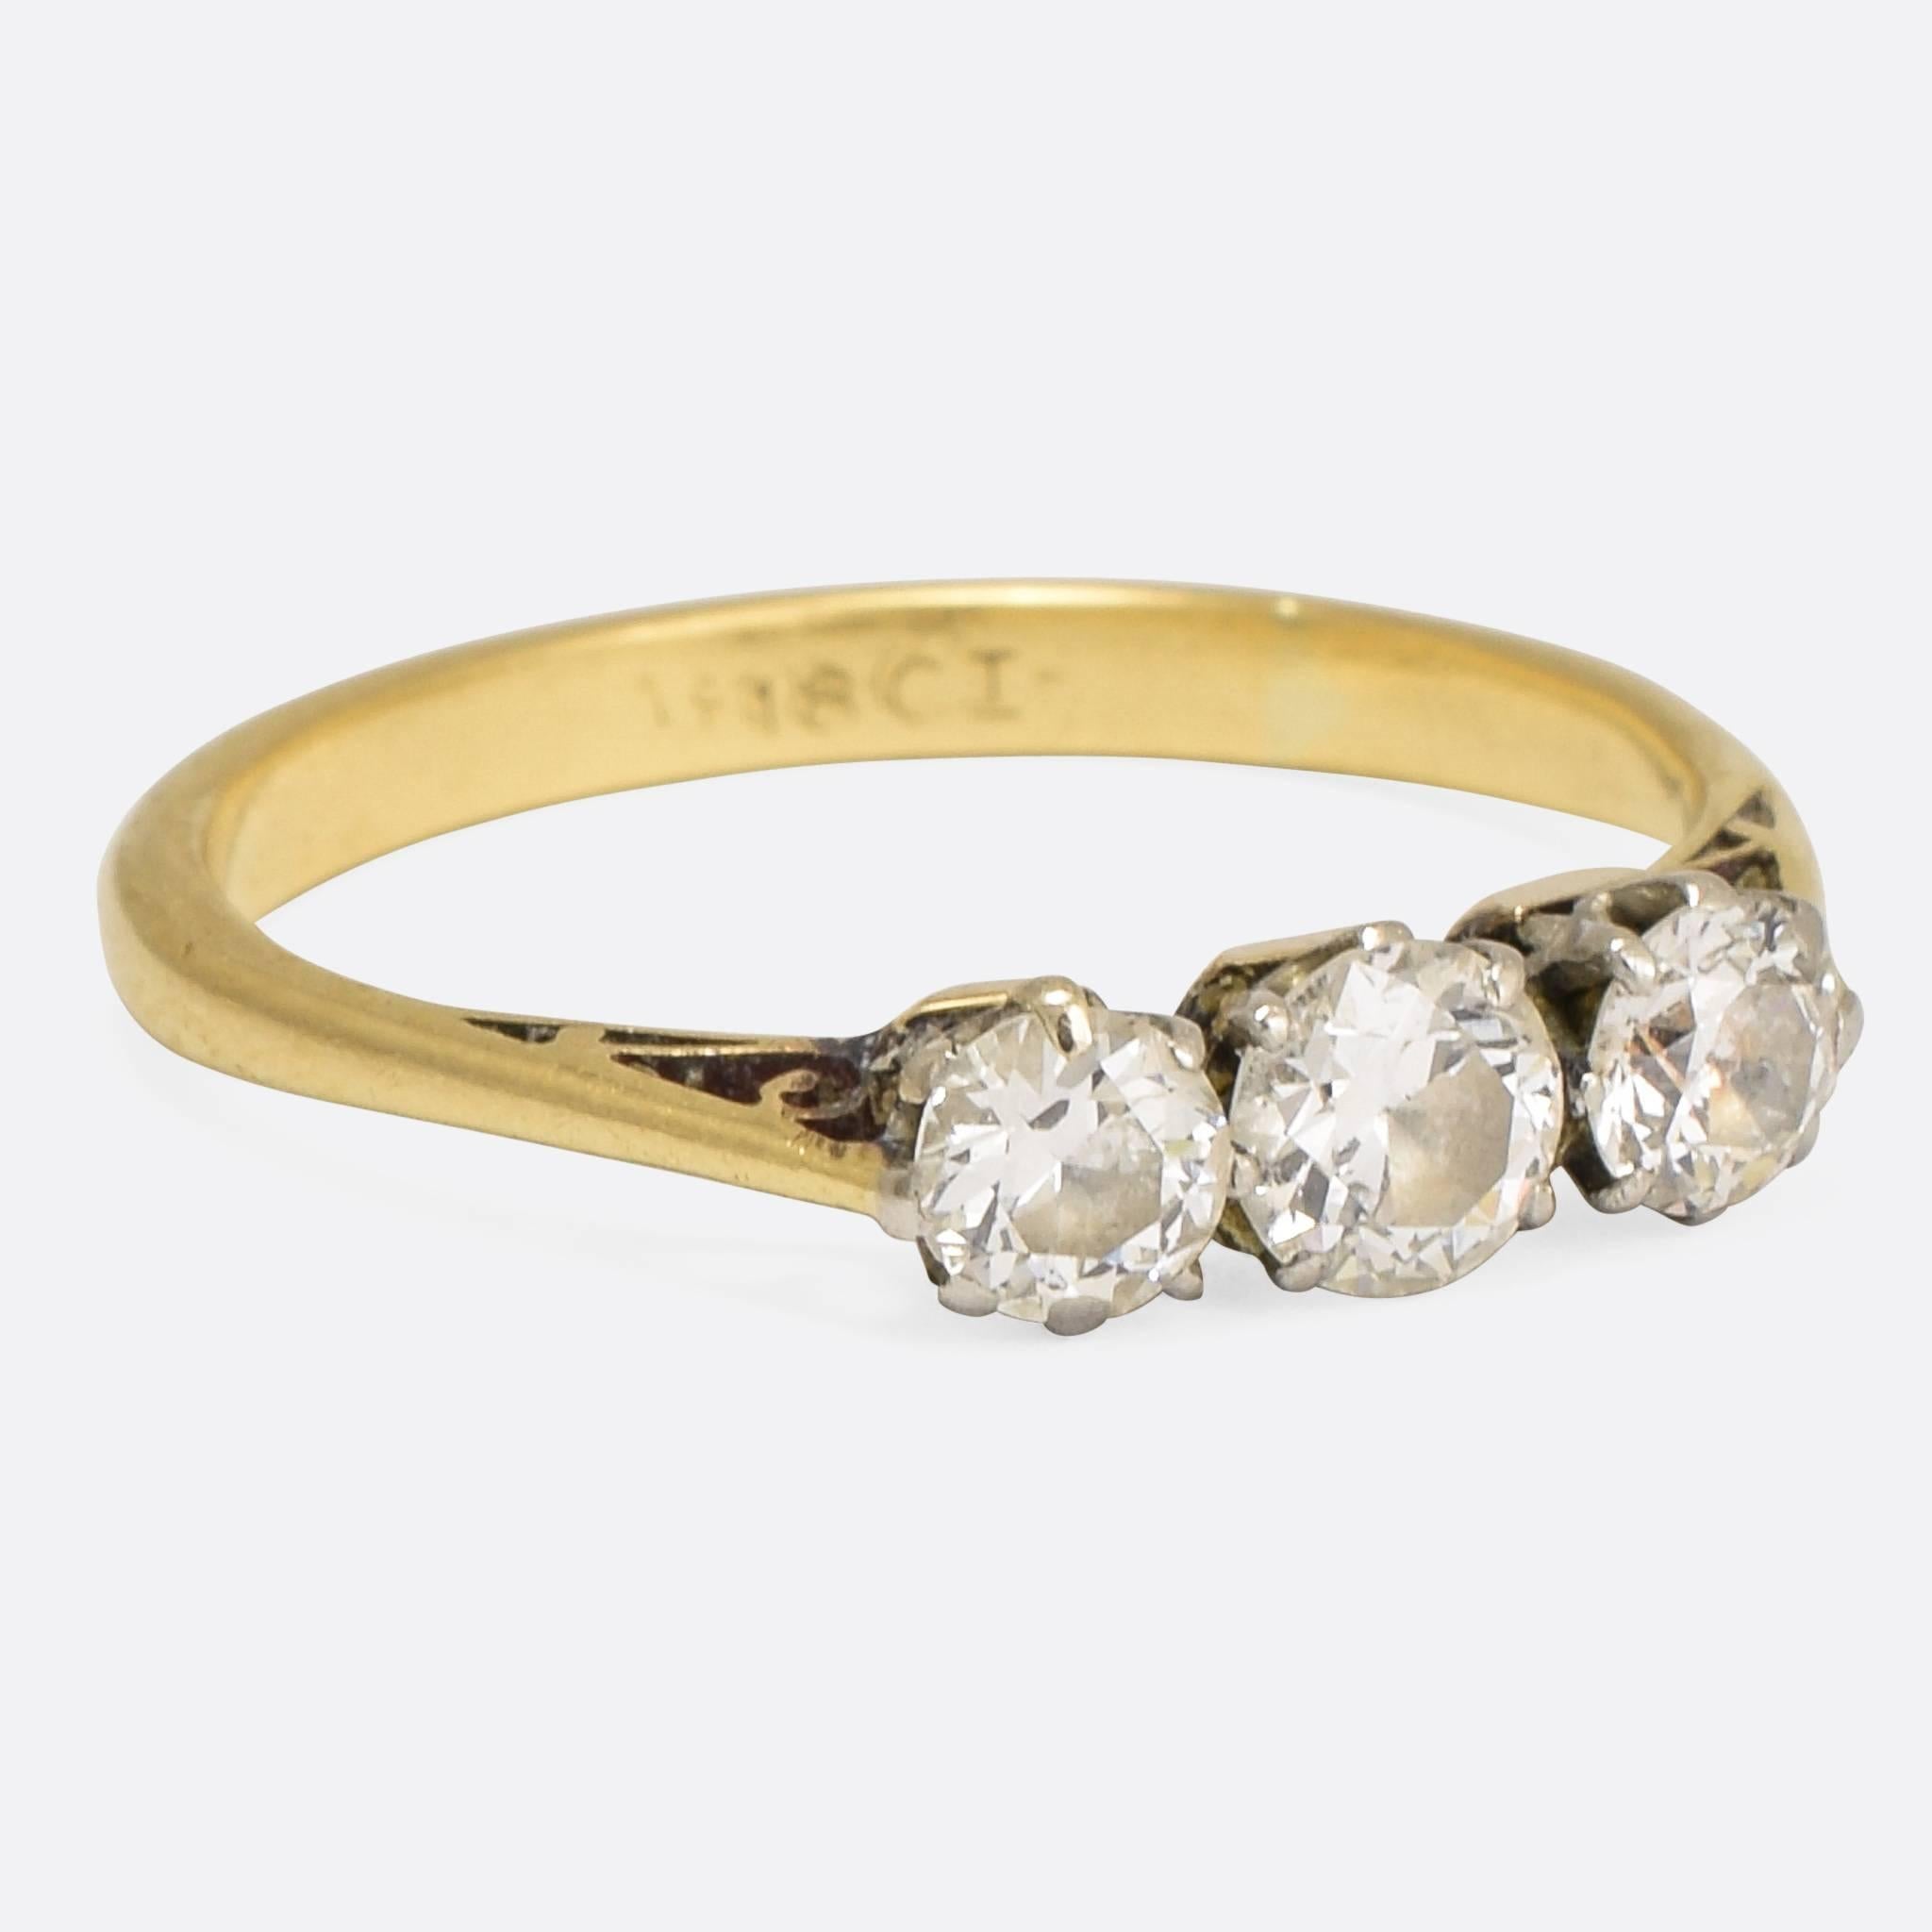 A sweet three stone Old-European cut Diamond engagement ring modelled in 18k yellow gold with platinum settings. Total Diamond weight: 60pts. VS/SI Clarity, G/H Colour. Ring size: 6.5.